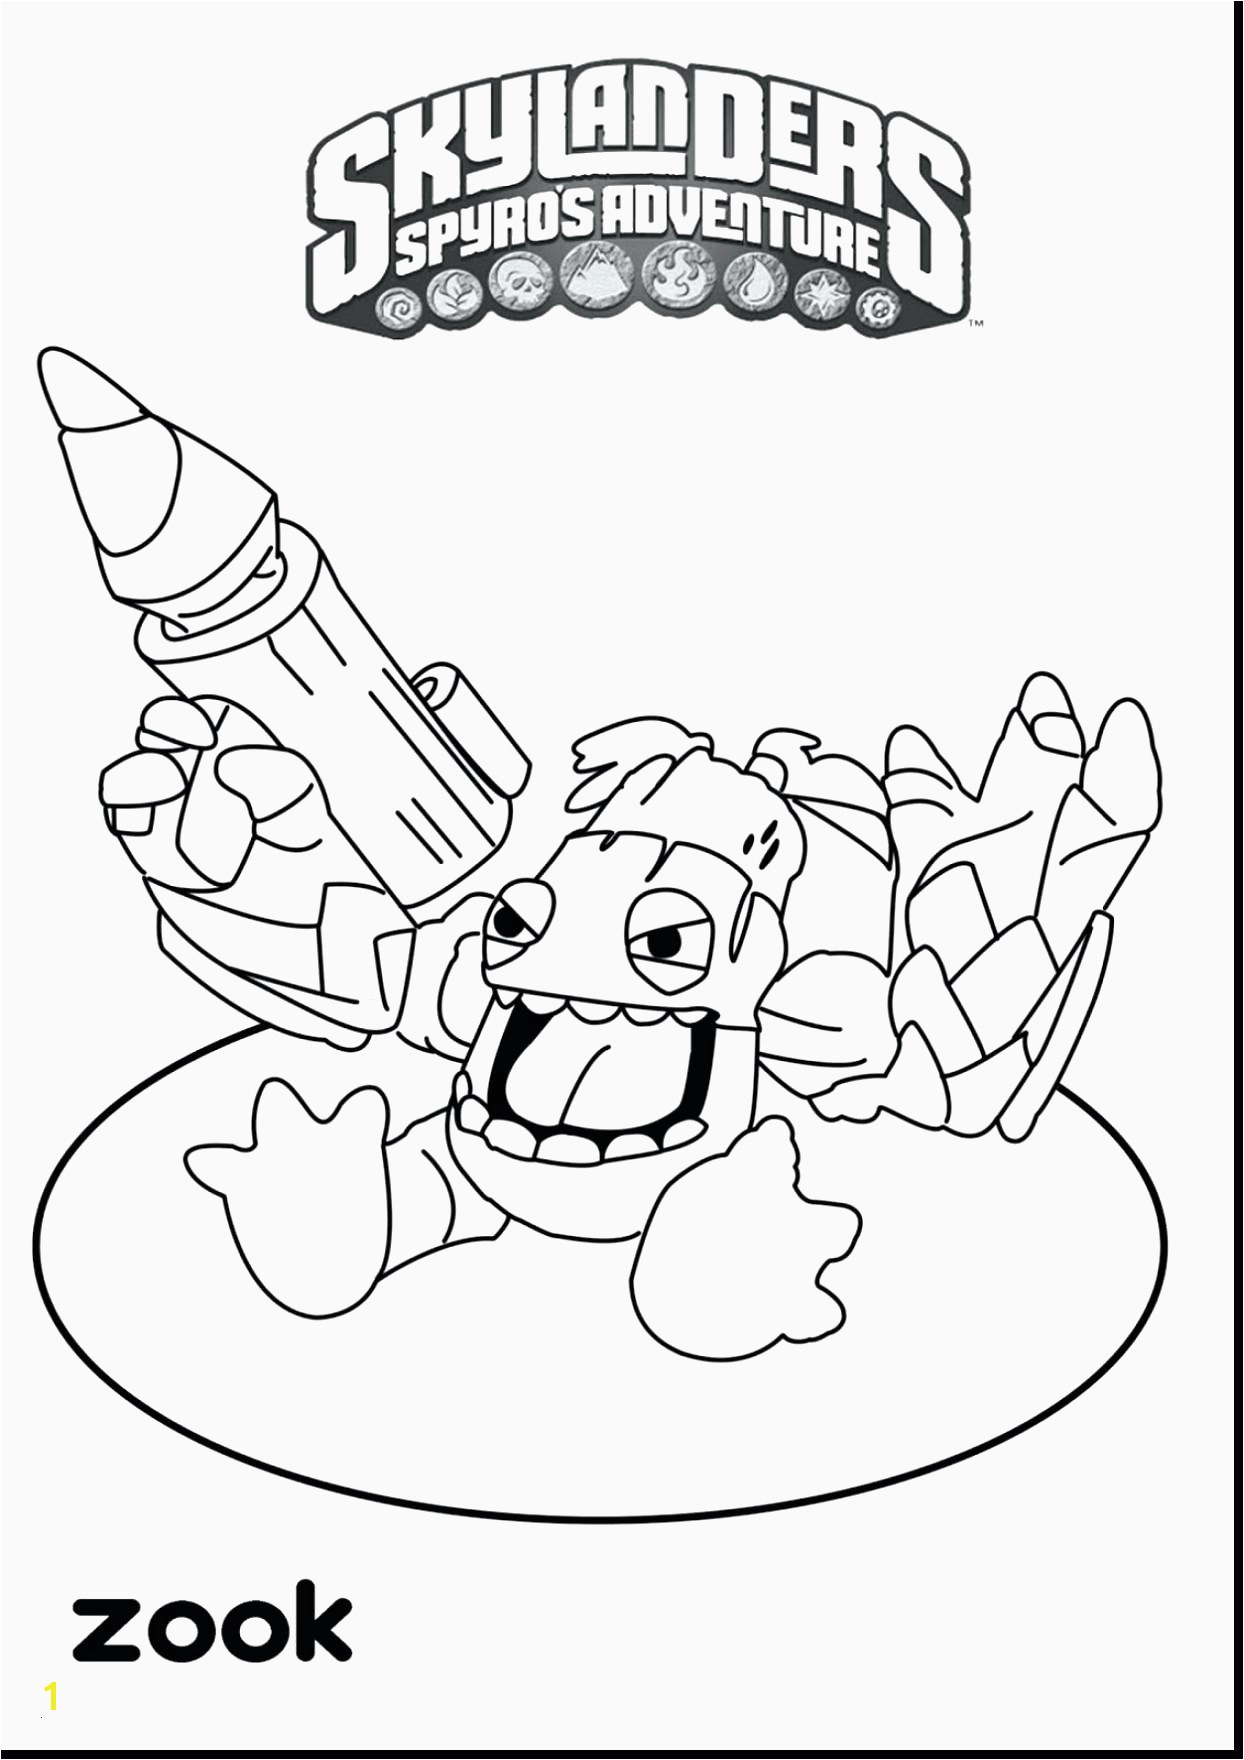 Electro Coloring Pages Coloring Pages Free Printable Coloring Pages for Children that You